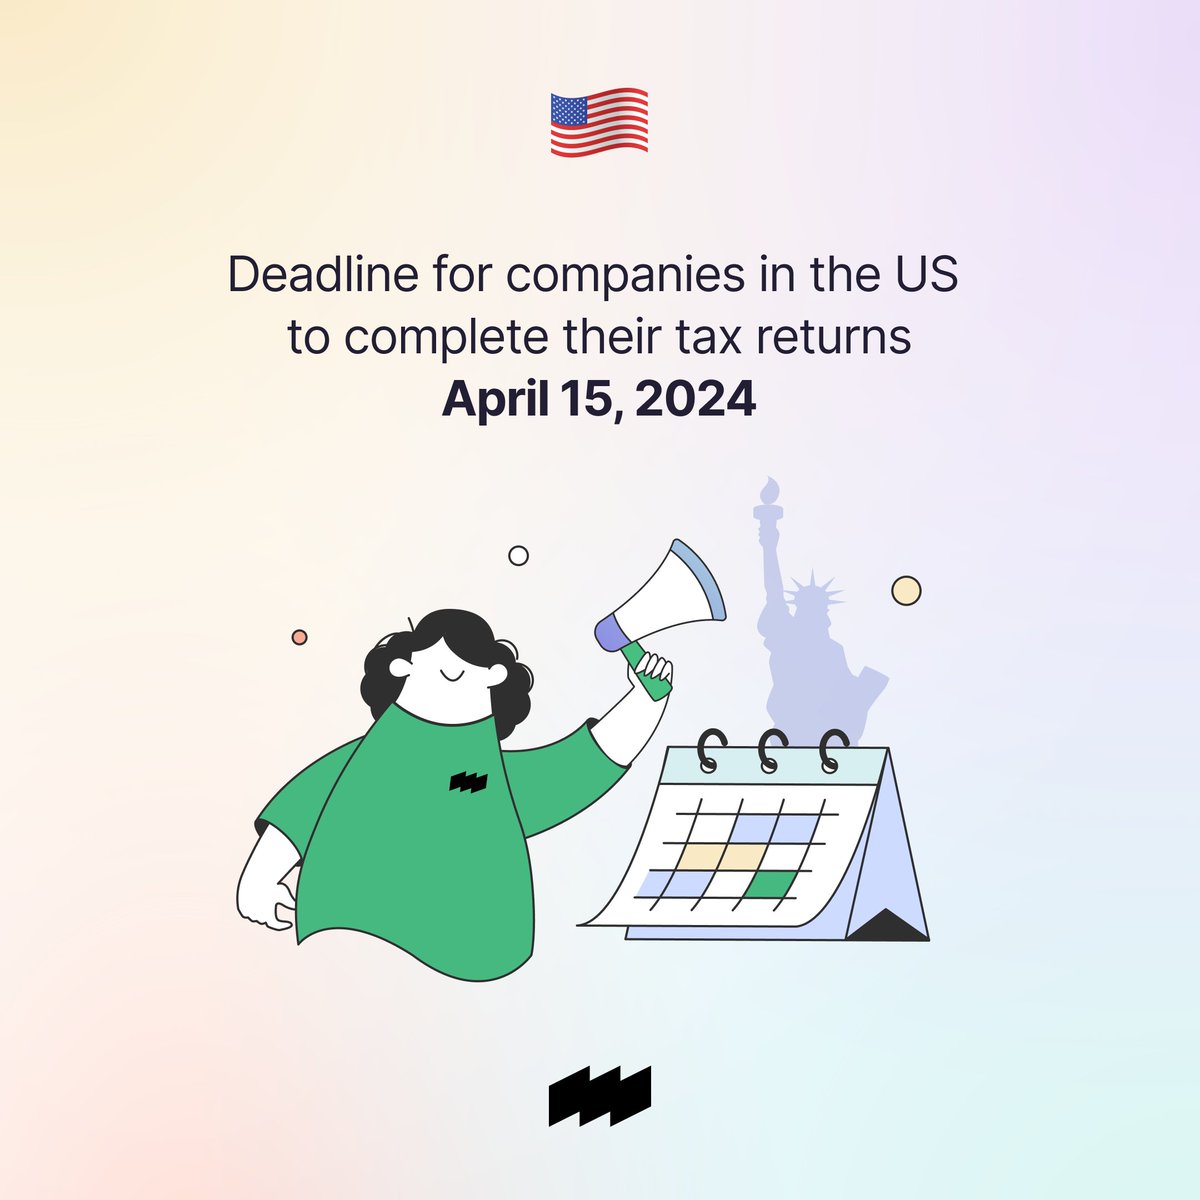 If you still need to file a tax return for your company in the US, act quickly. Remember that it must be completed by April 15, 2024! ⏳   

Click the link to schedule a meeting with our expert team. 👉  bit.ly/3PBEktz   

#workhycom #uscompany #taxreturn #taxseason2024